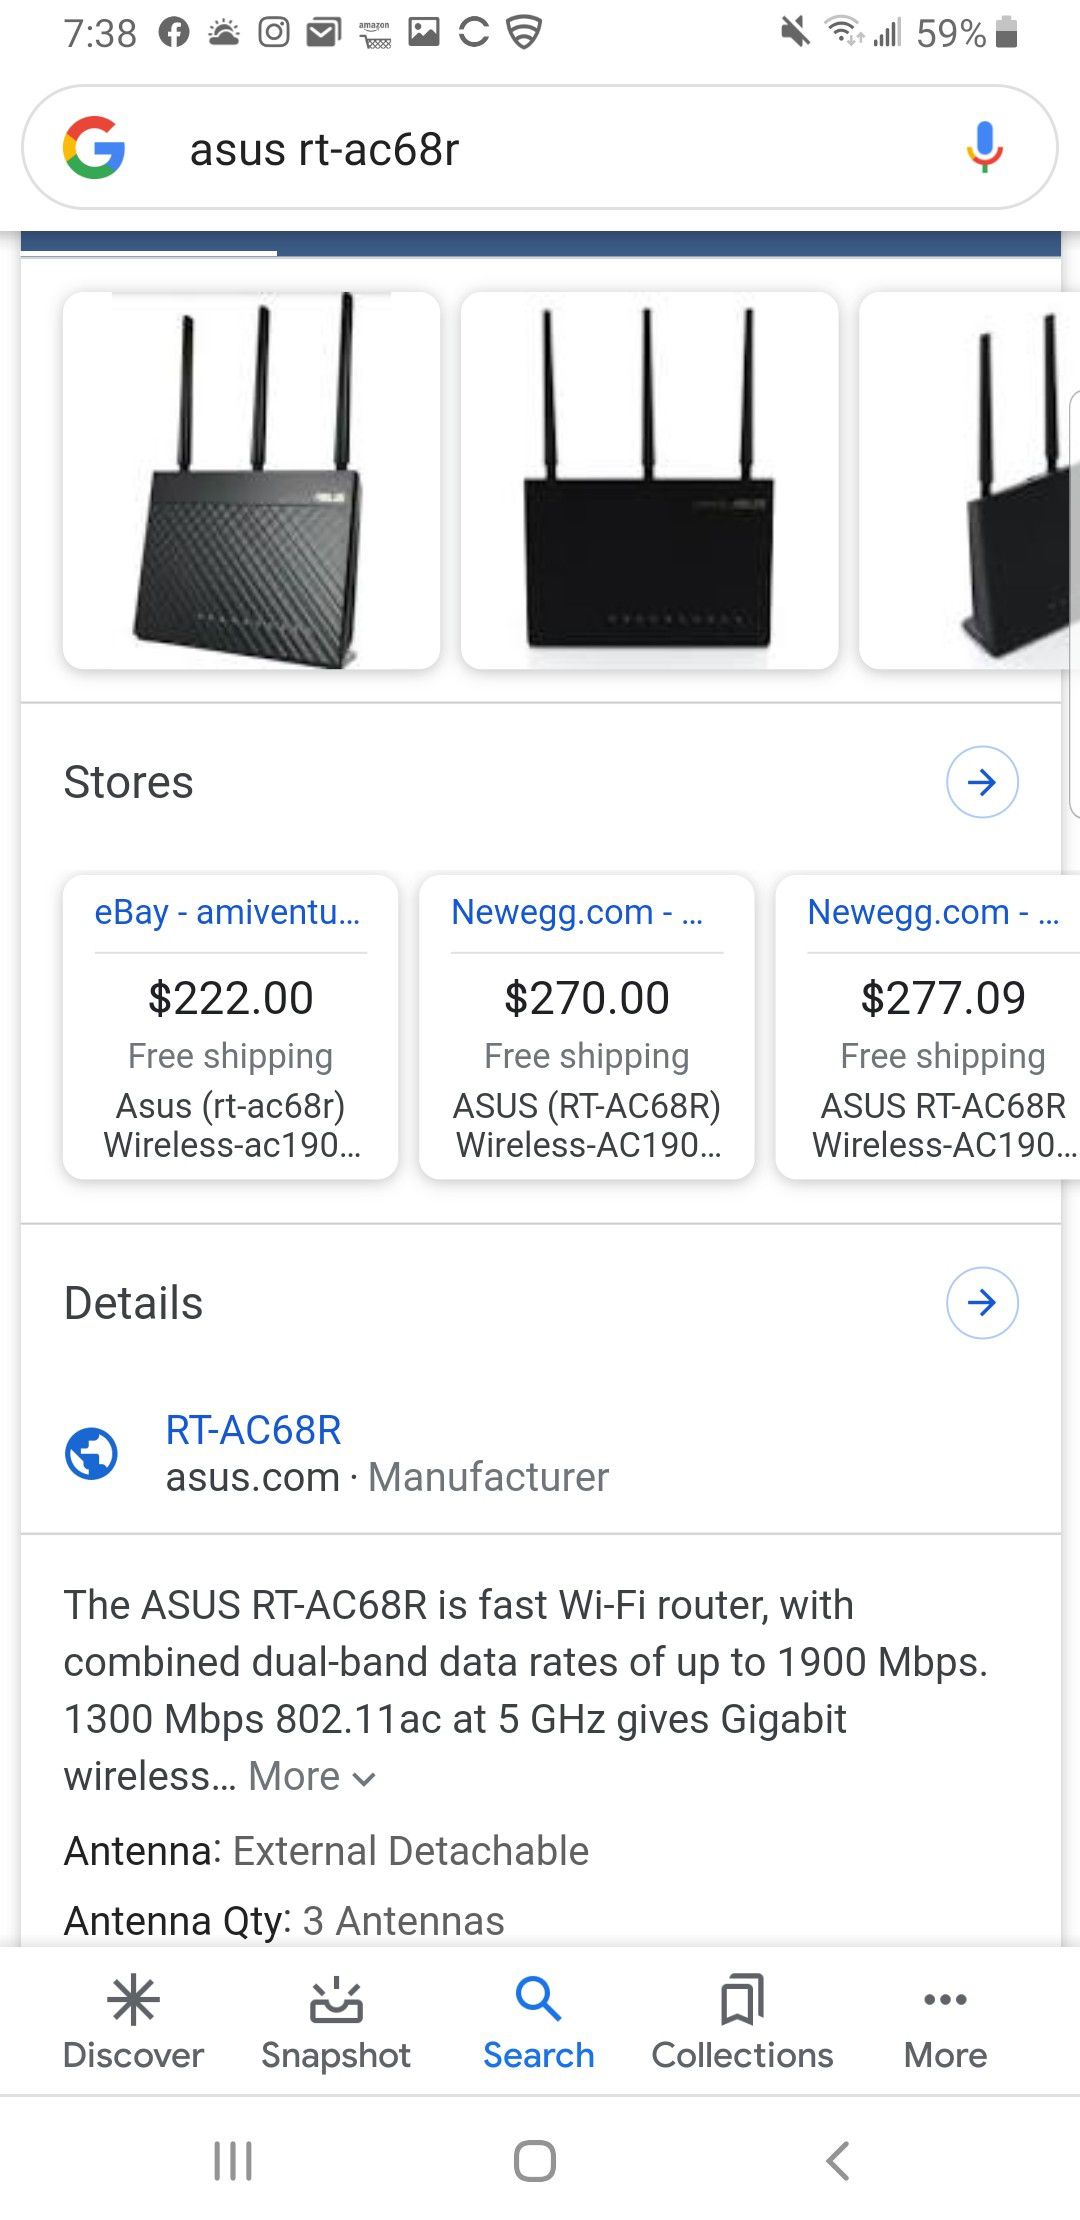 ASUS RT-AC68R dual bound router. Sells for around $250 on Amazon. 50%off!